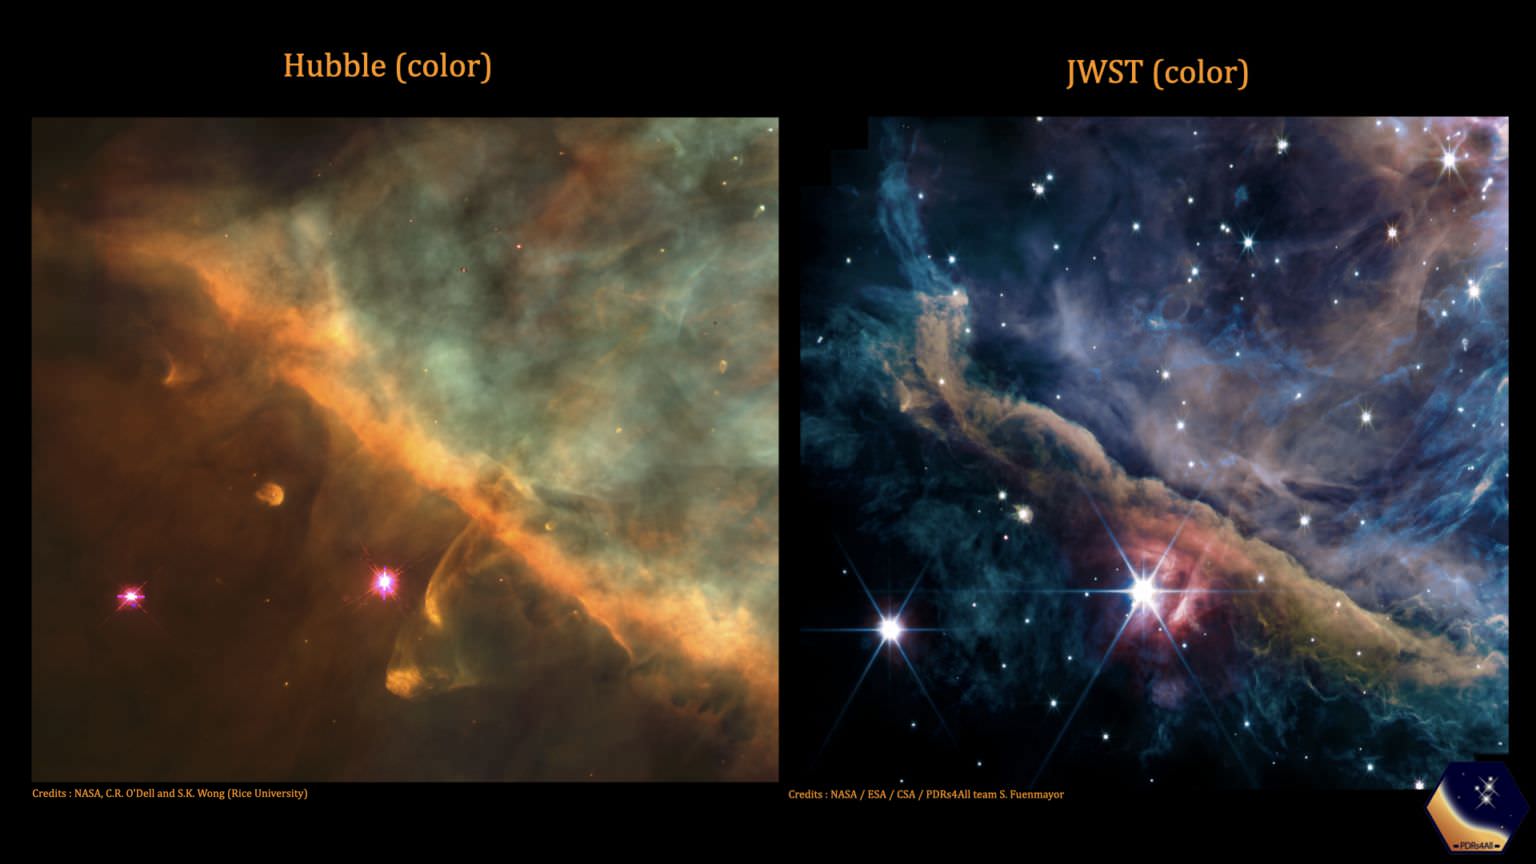 Comparison of James and Hubble image of Orion Nebula